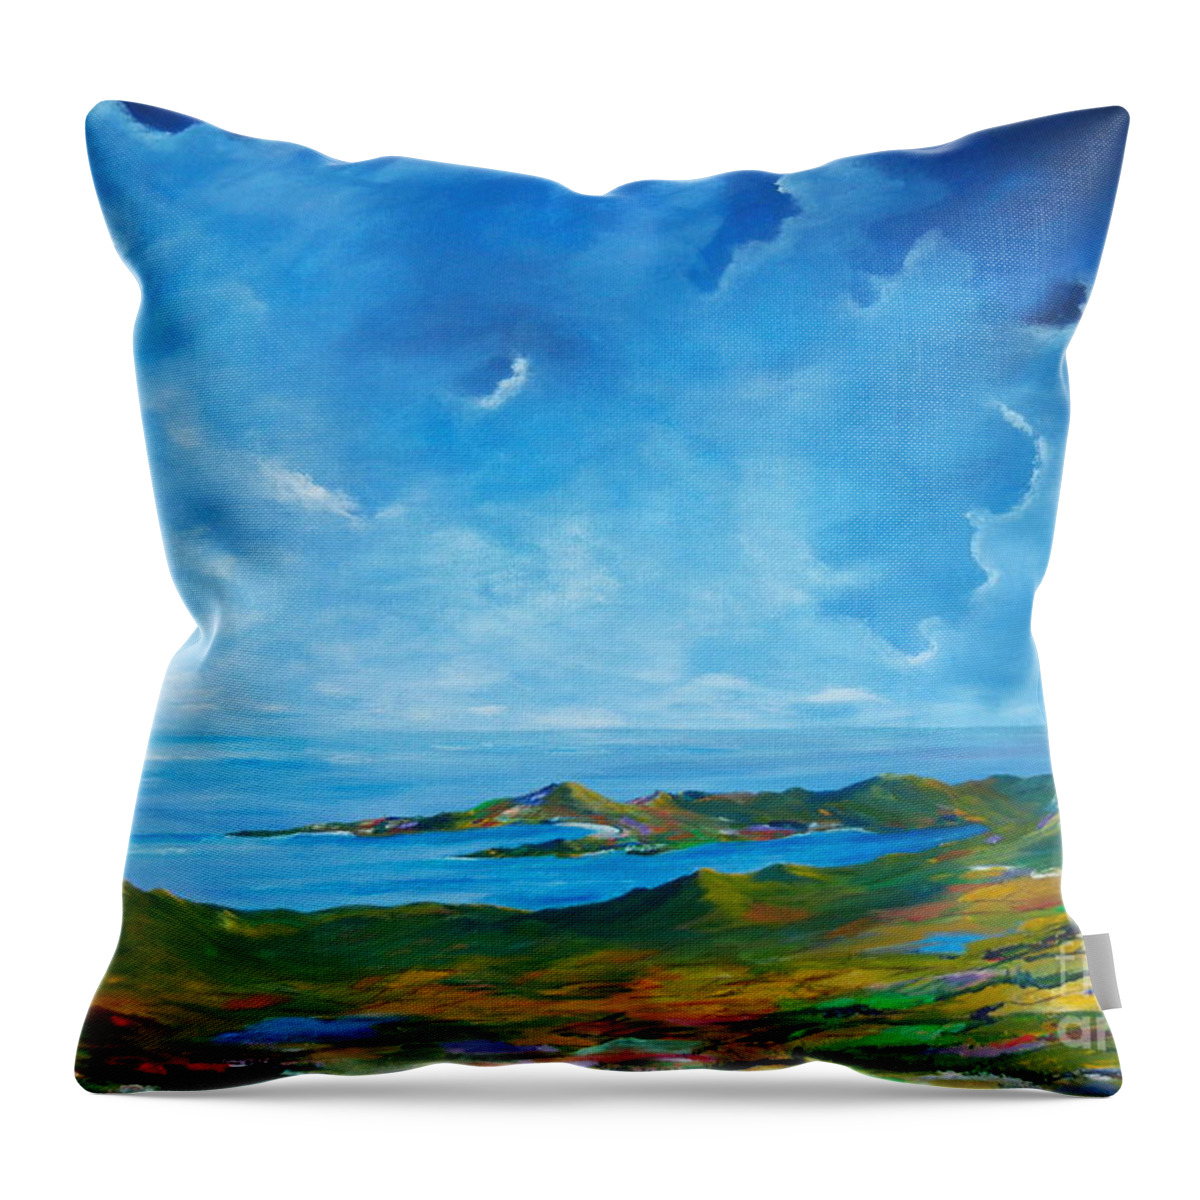 Palette Of Ireland Throw Pillow featuring the painting The Palette of Ireland # 2 by Conor Murphy